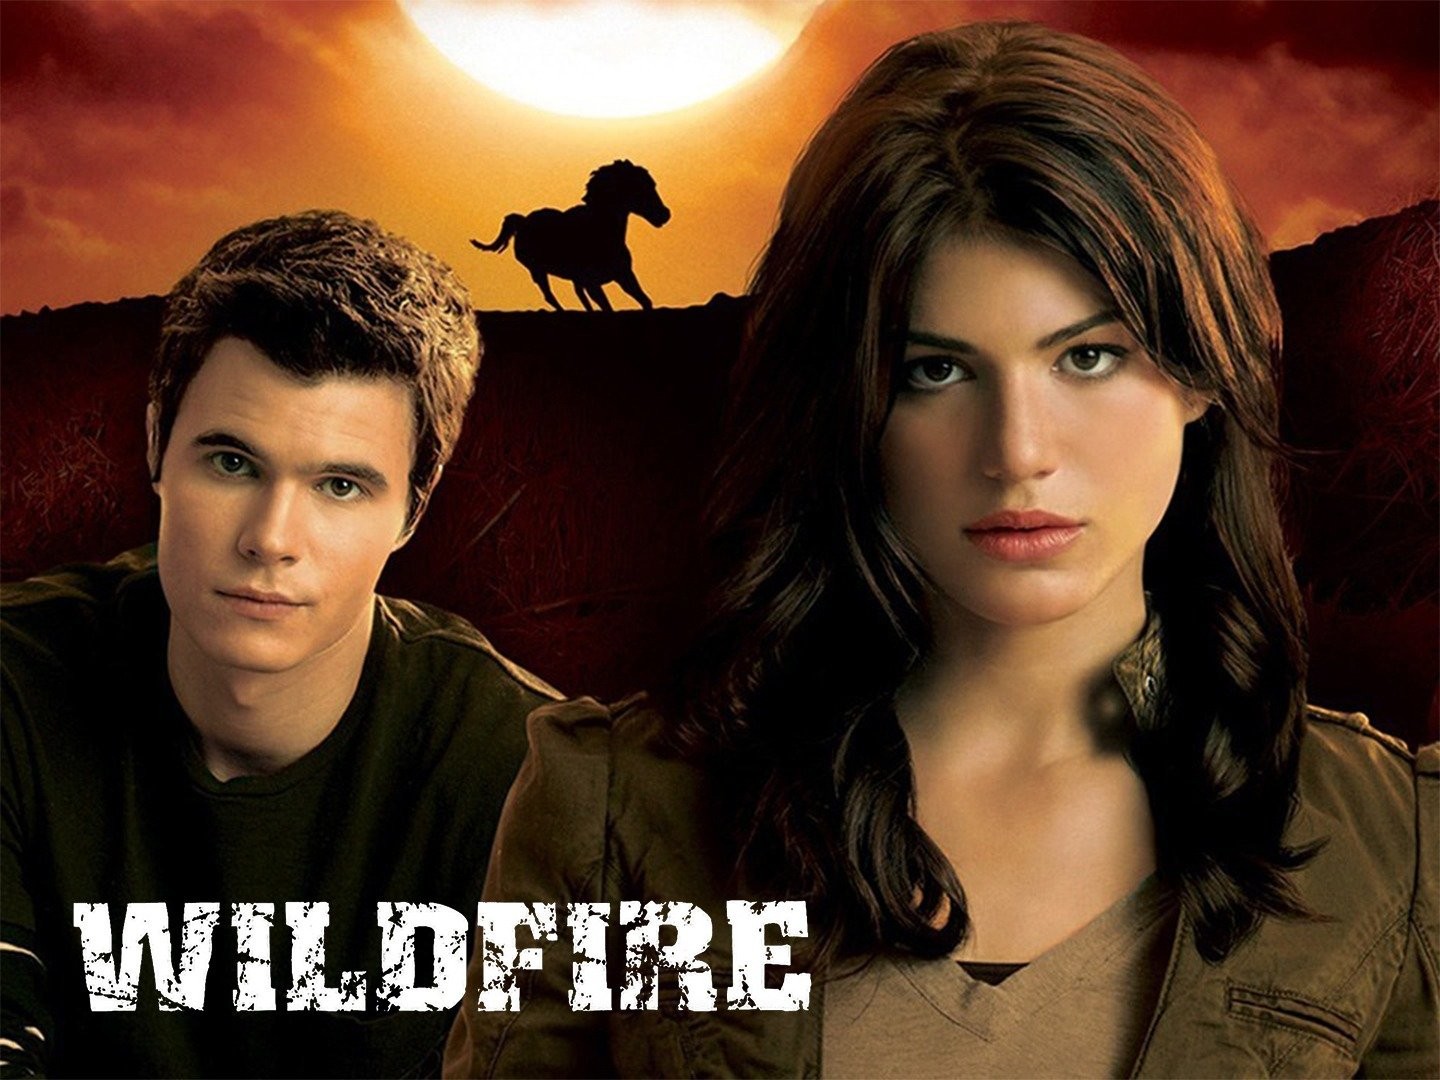 Wildfire: Complete TV Series Seasons 1-4 DVD Collection